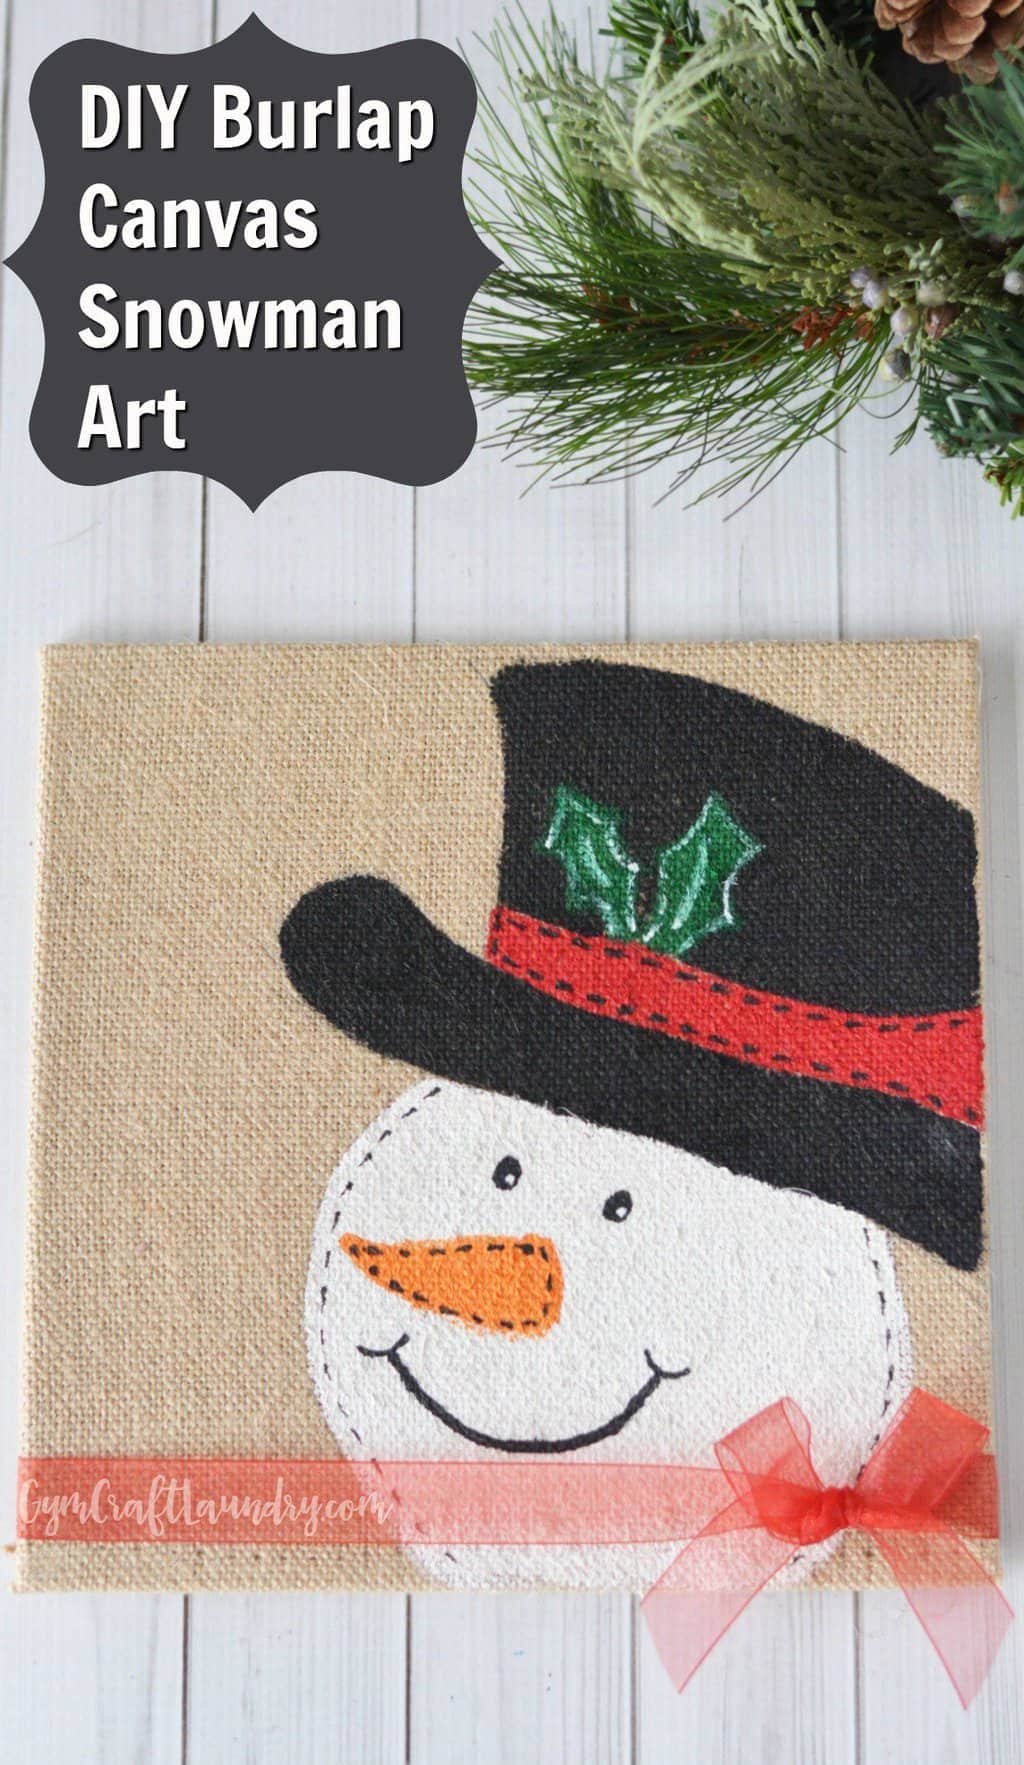 Wow your family and friends with this adorable and easy DIY Burlap Canvas Snowman Craft from Gym Craft Laundry.